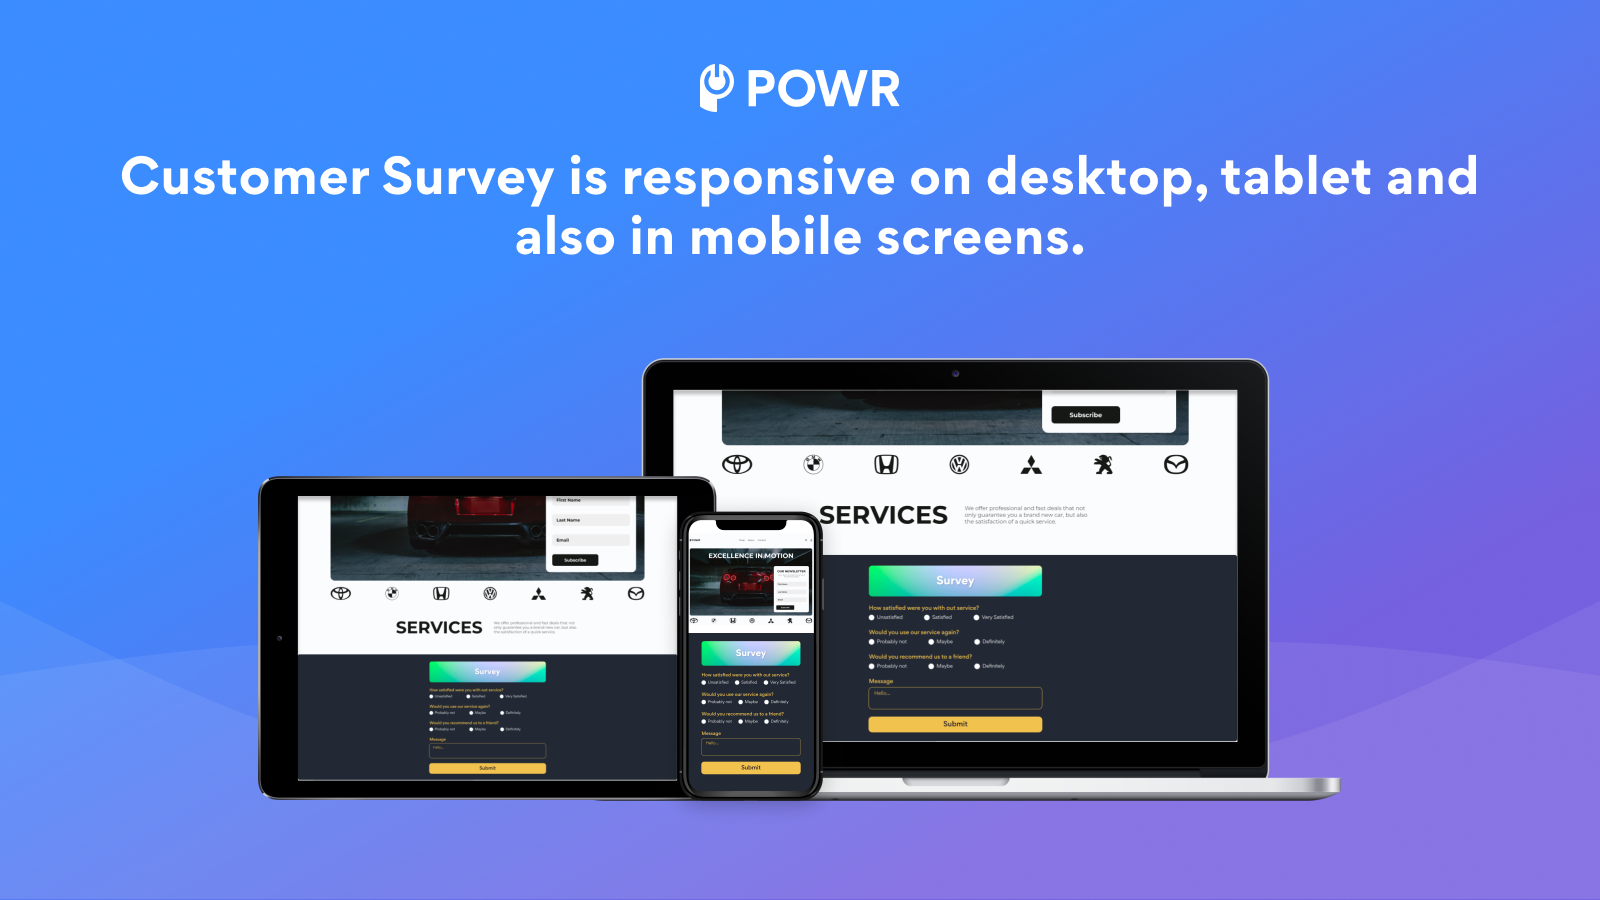 Customer Survey is responsive on all connected devices